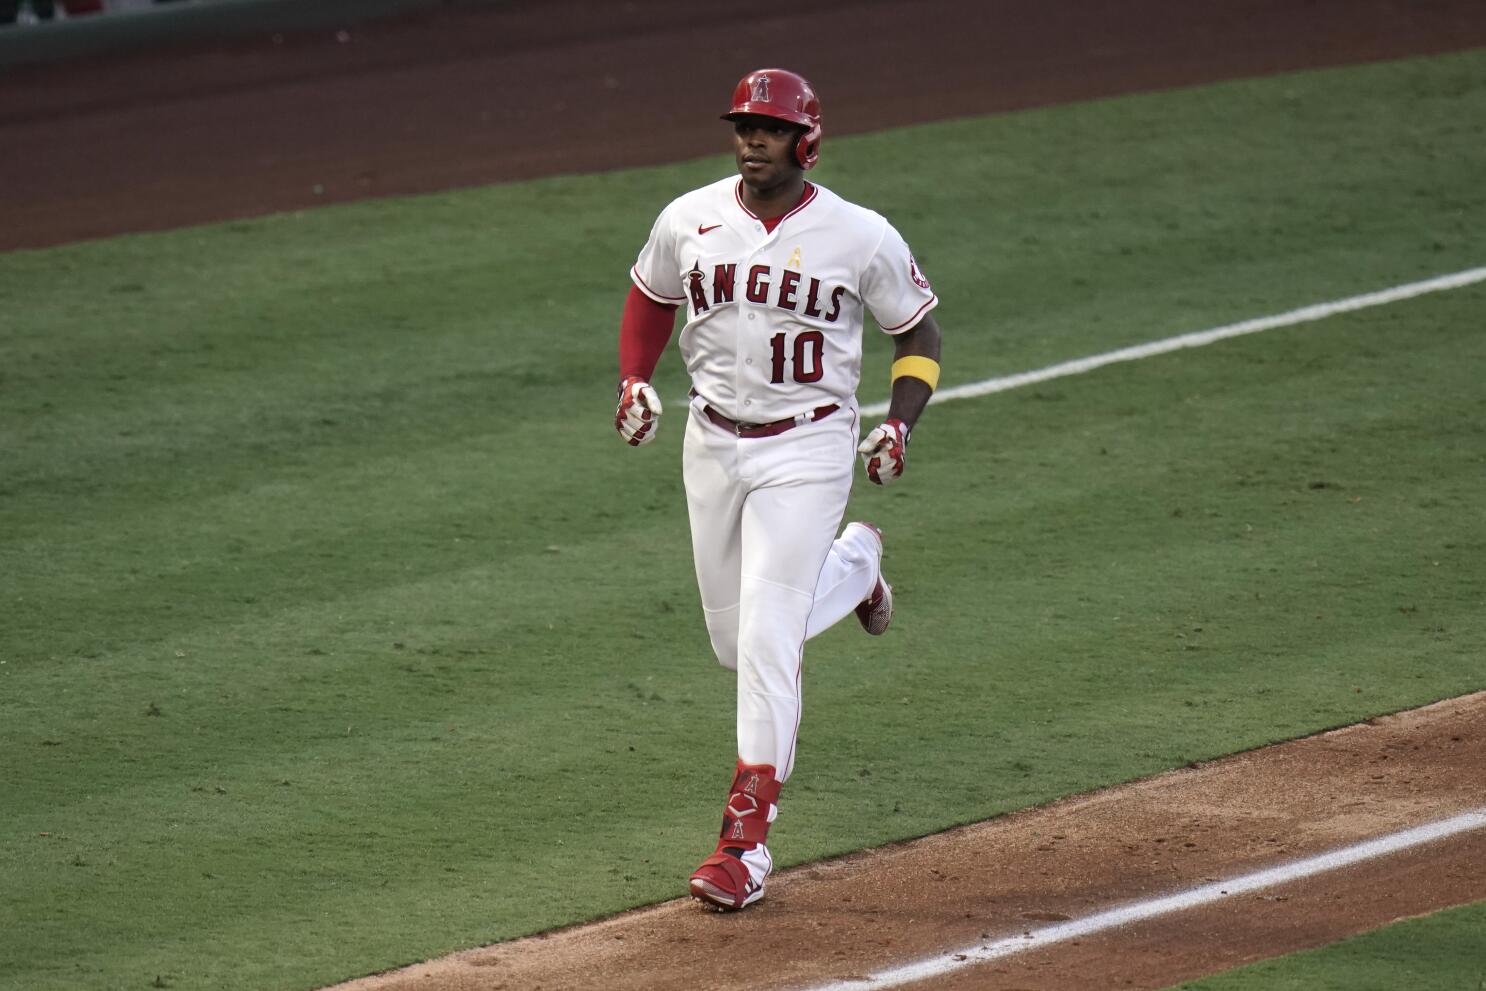 Not in Hall of Fame - 11. Justin Upton